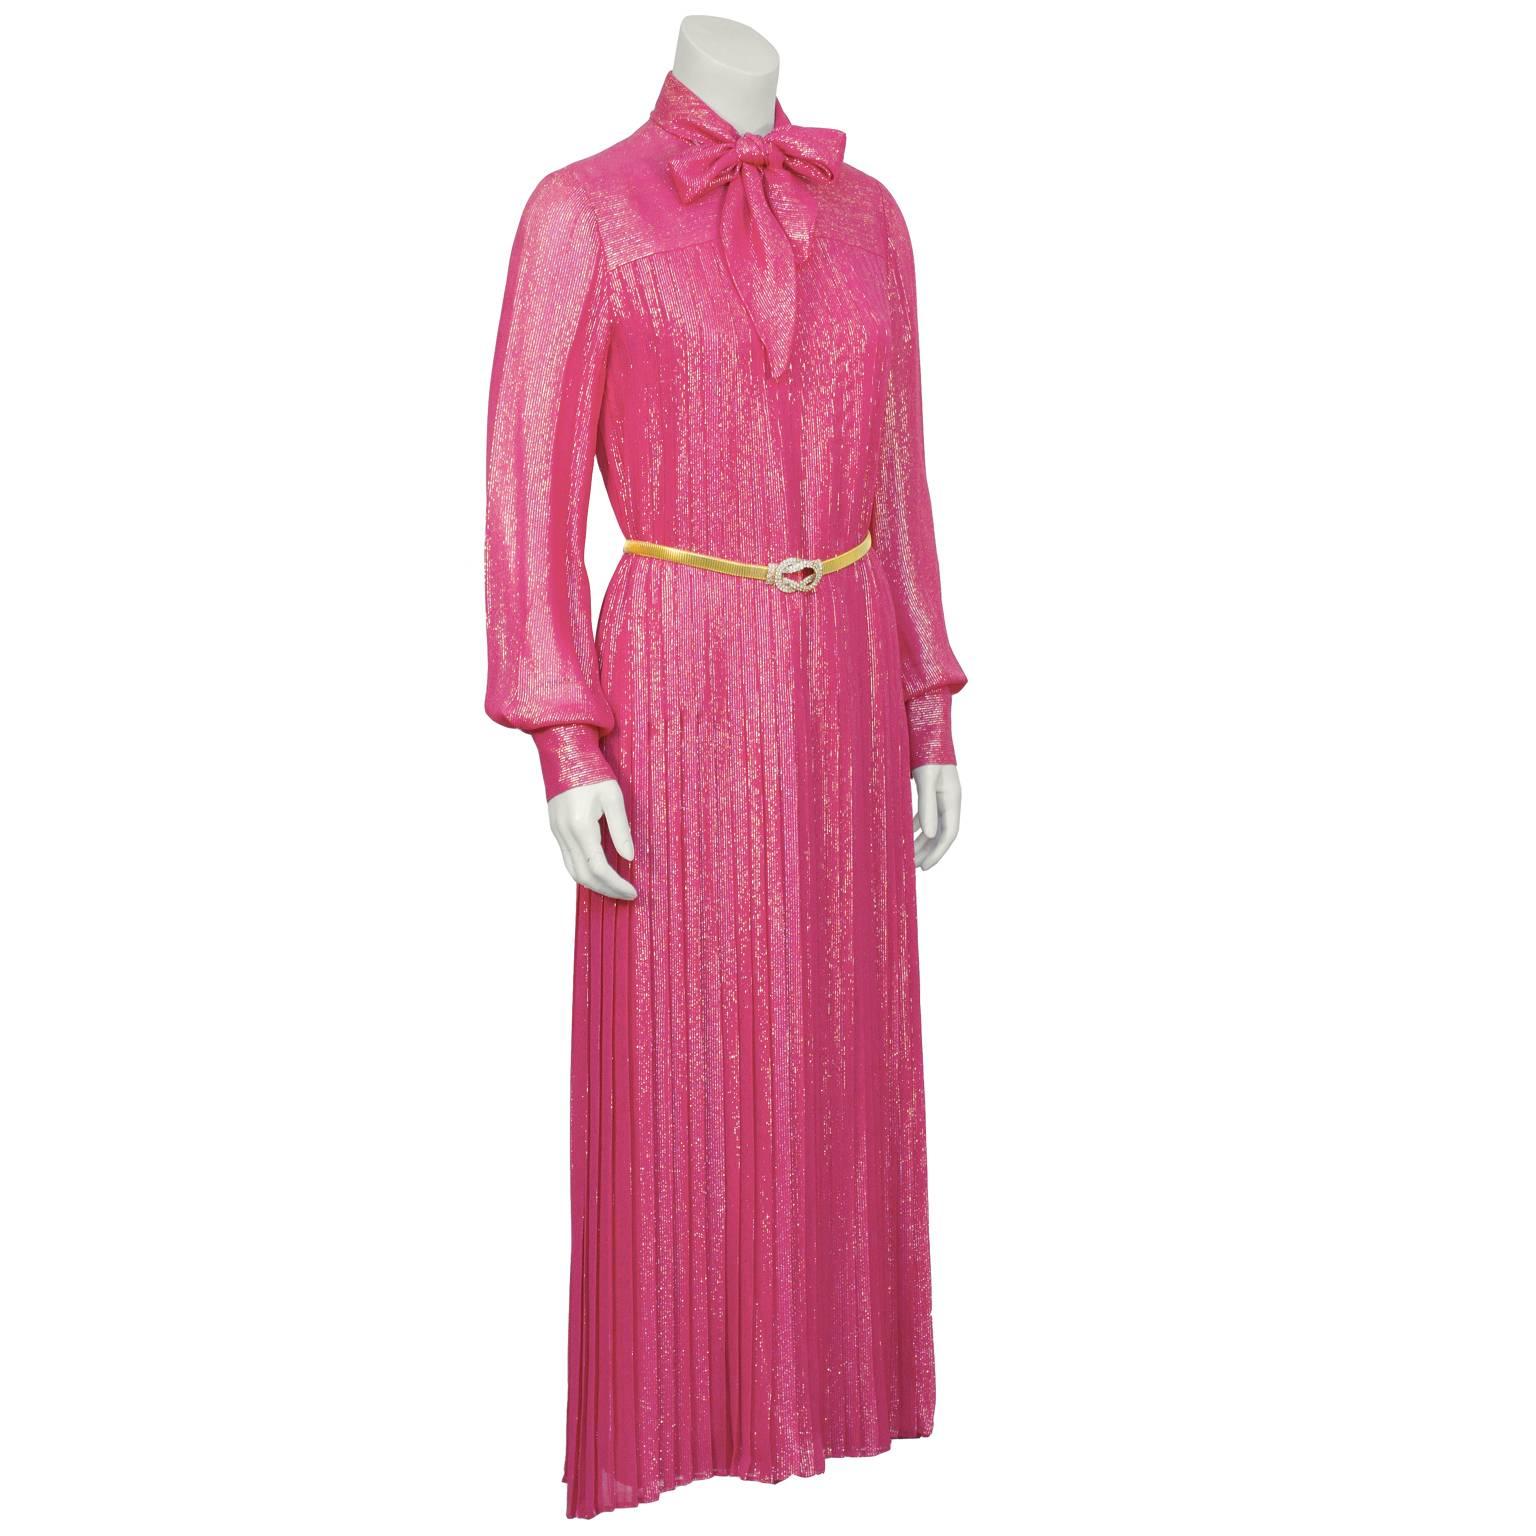 Pink and gold lurex pleated gown by Andre Laug from the 1970's. The long sleeve dress has a round neckline and a yoke seam above the bust. Narrow box pleats travel down the dress with top stitching keeping them in place to the top of the hip.